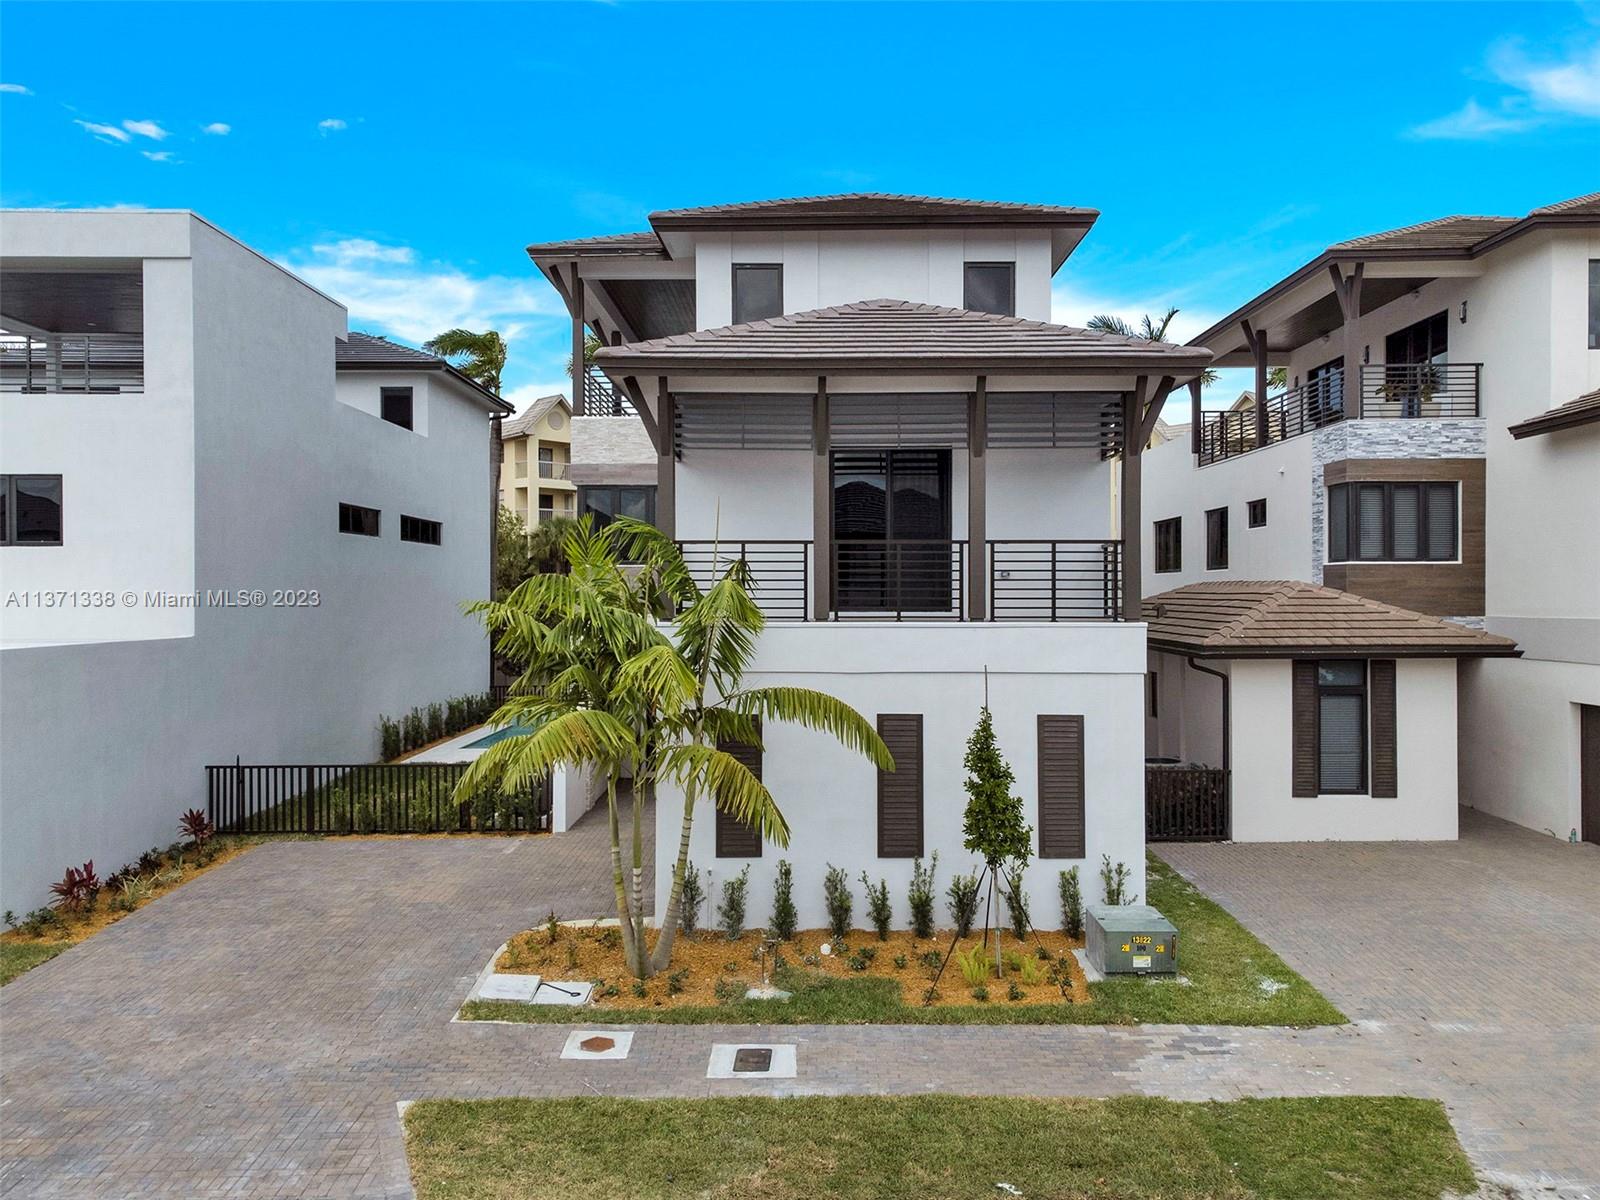 This 5 Bedroom/ 5 Bath/ 2 Car Garage/ with Pool & Roof Top Terrace is built to entertain. Located at Canarias
Doral's Luxurious Community, with a full array of amenities, close to shops, restaurants and schools. This is a brand new construction, Capri B model with three stories.